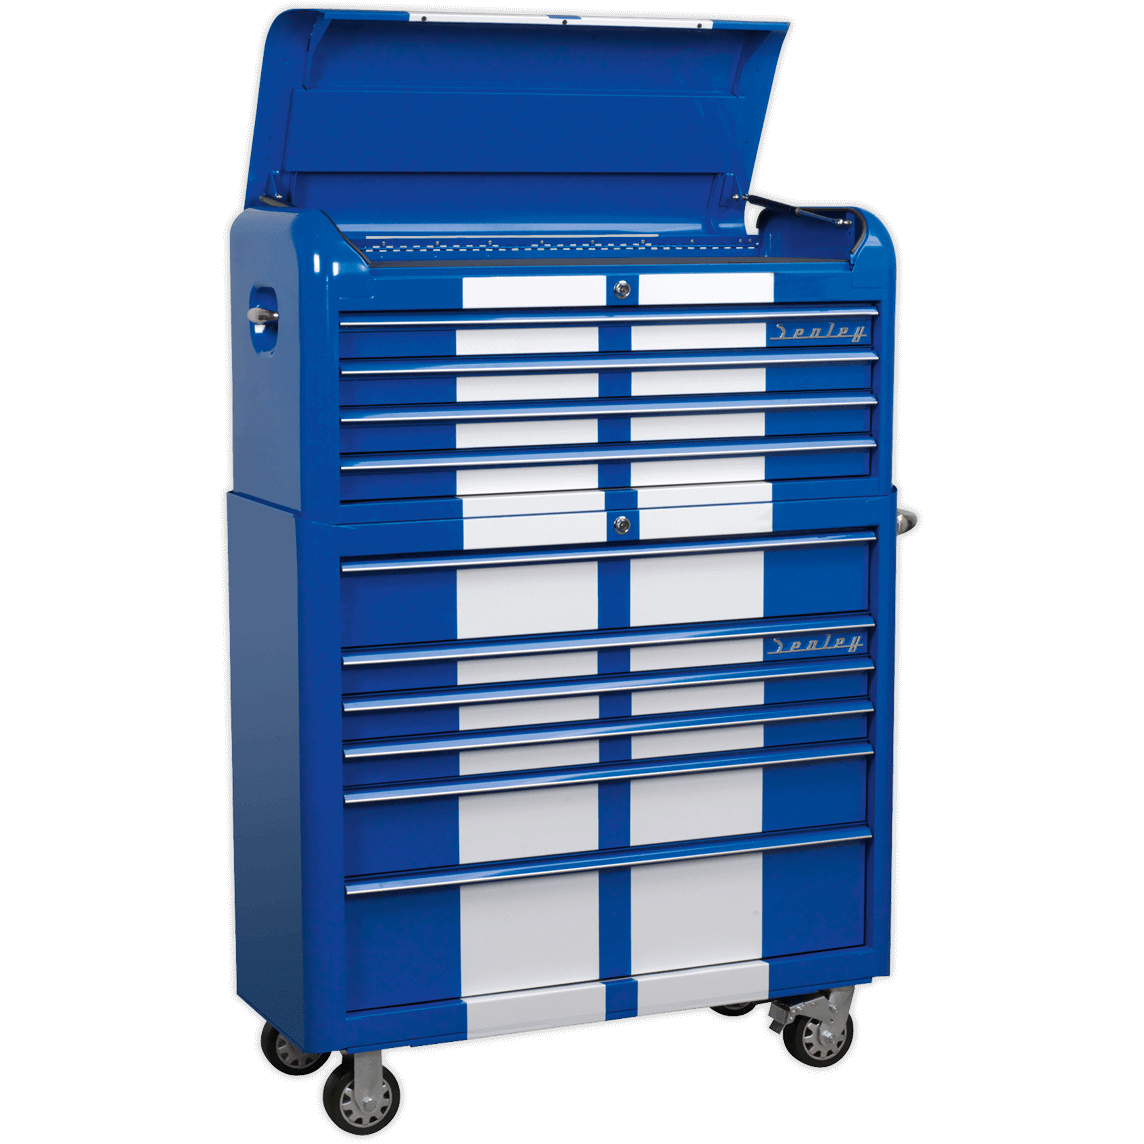 Sealey Premier Retro Style Wide 10 Drawer Roller Cabinet and Tool Chest Blue / White